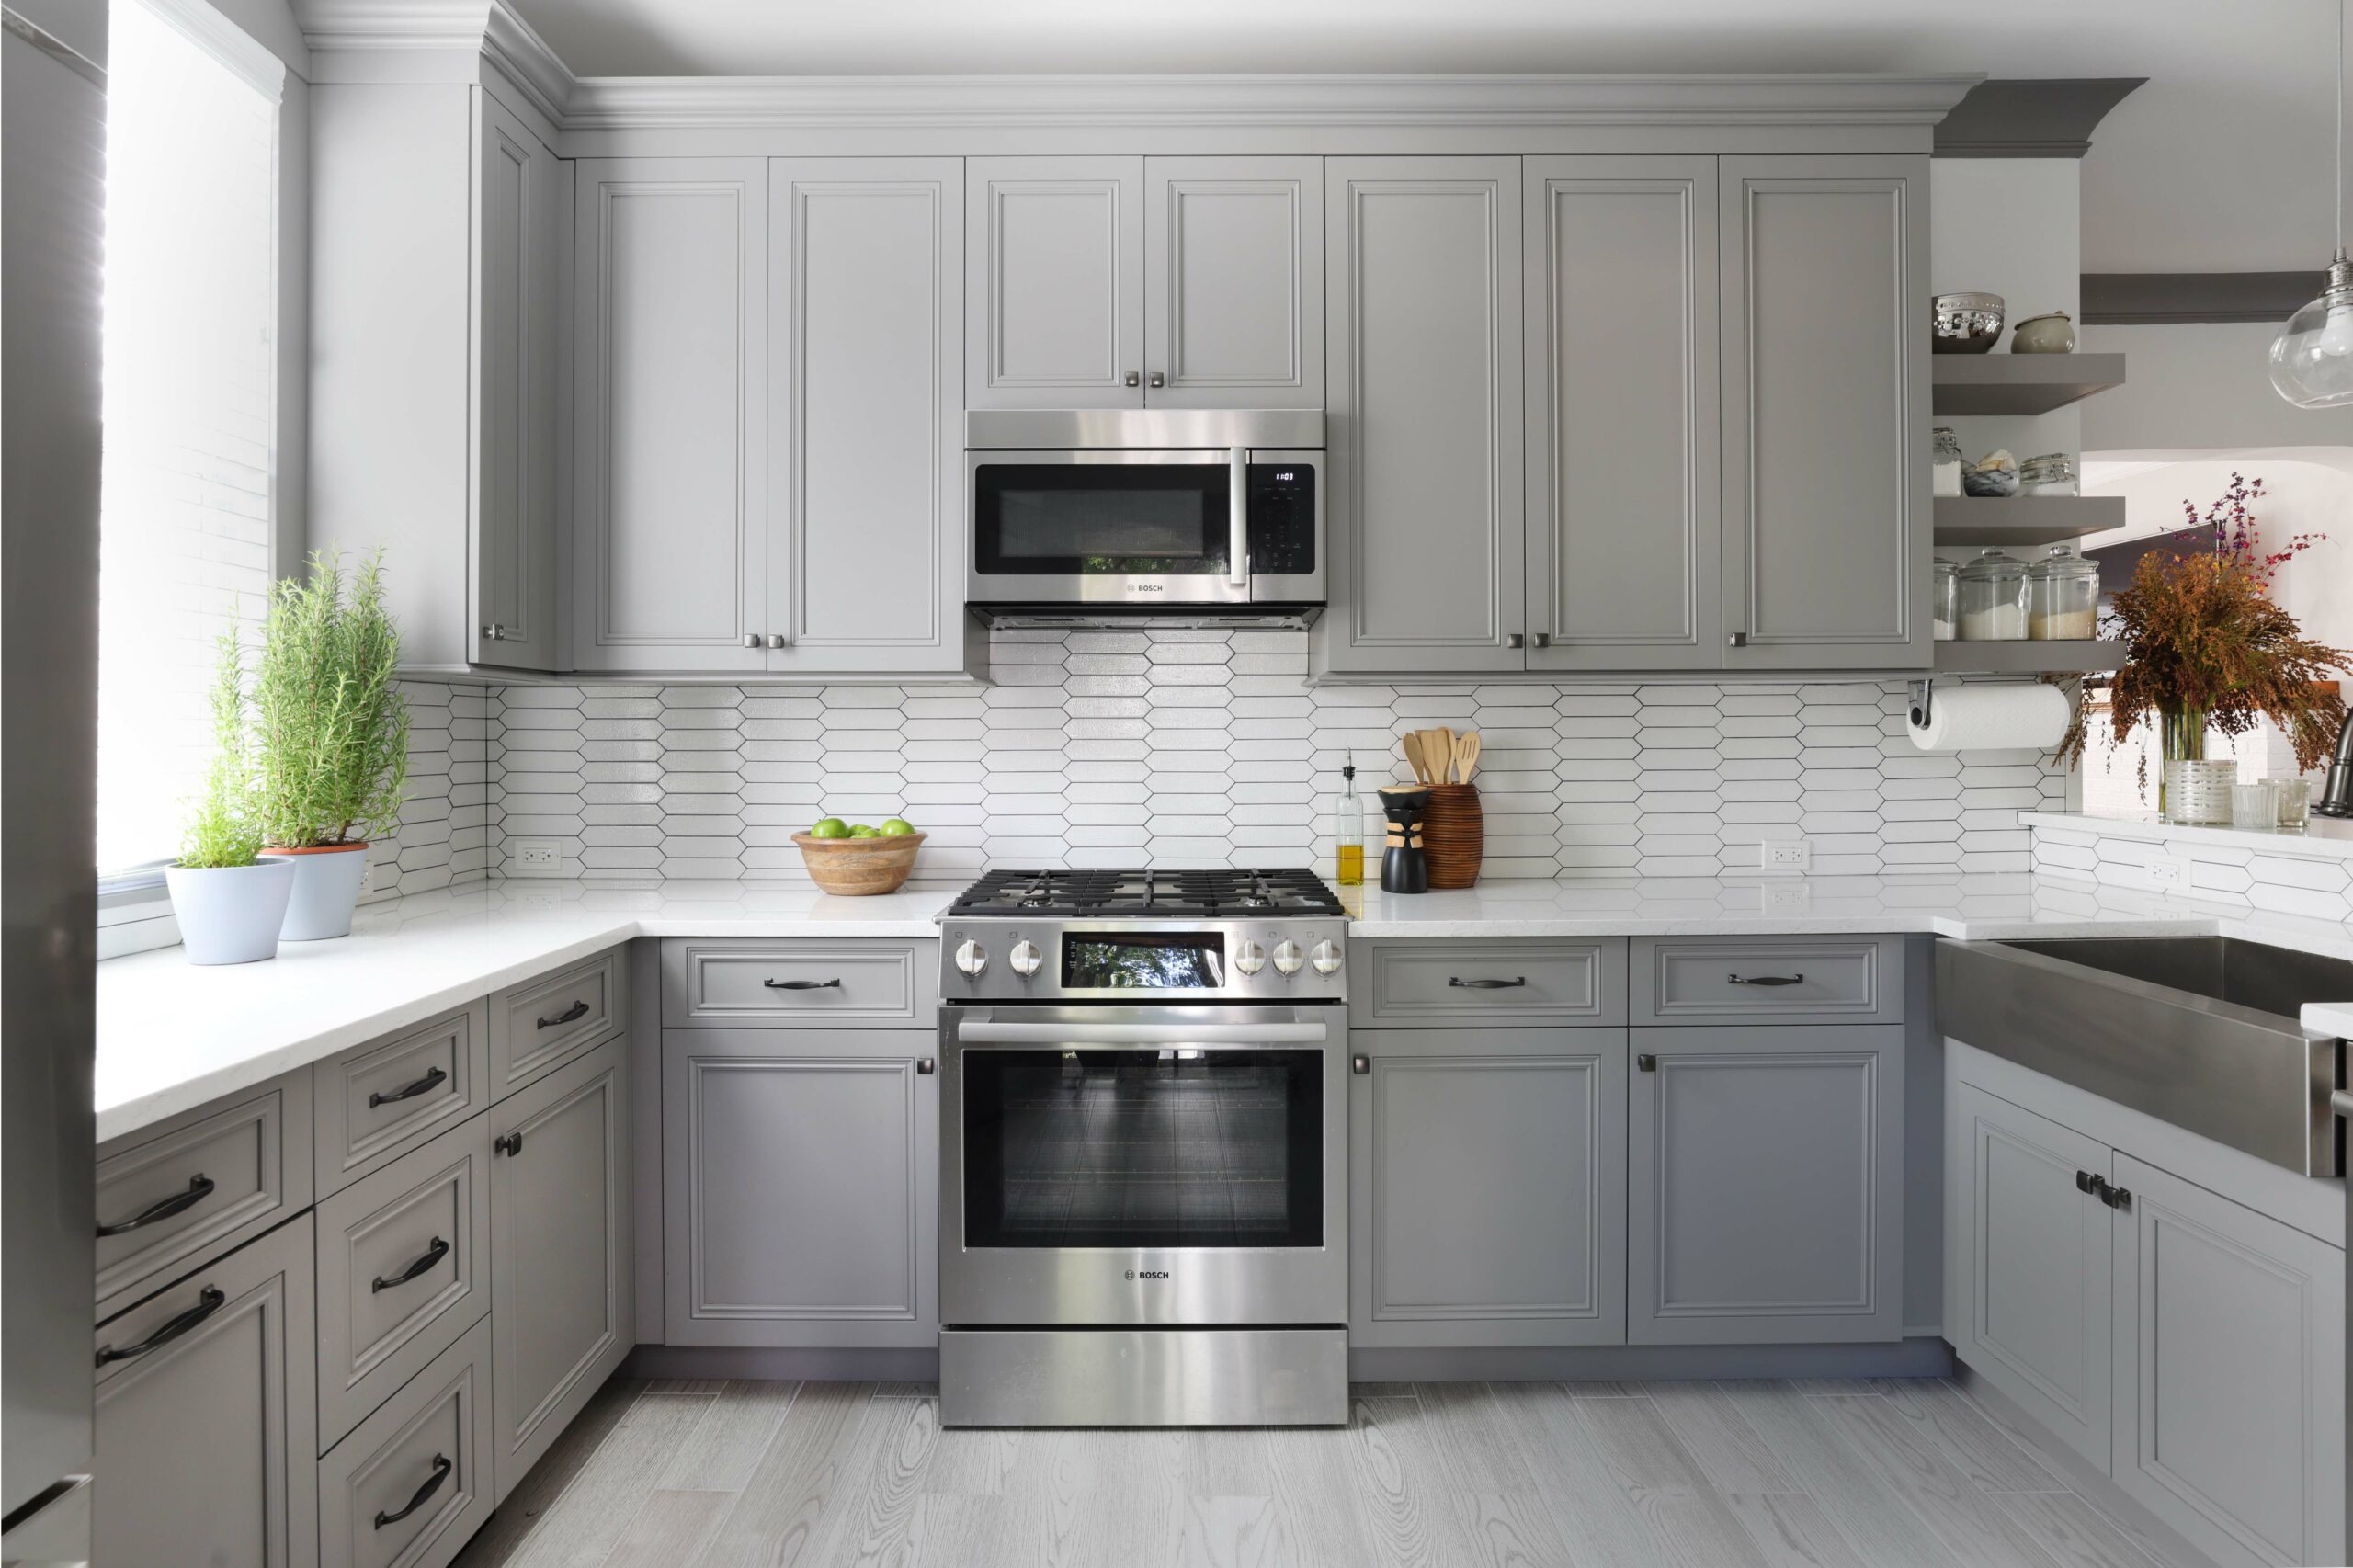 gray kitchen with stainless steel sink and appliances and ceramic backsplash